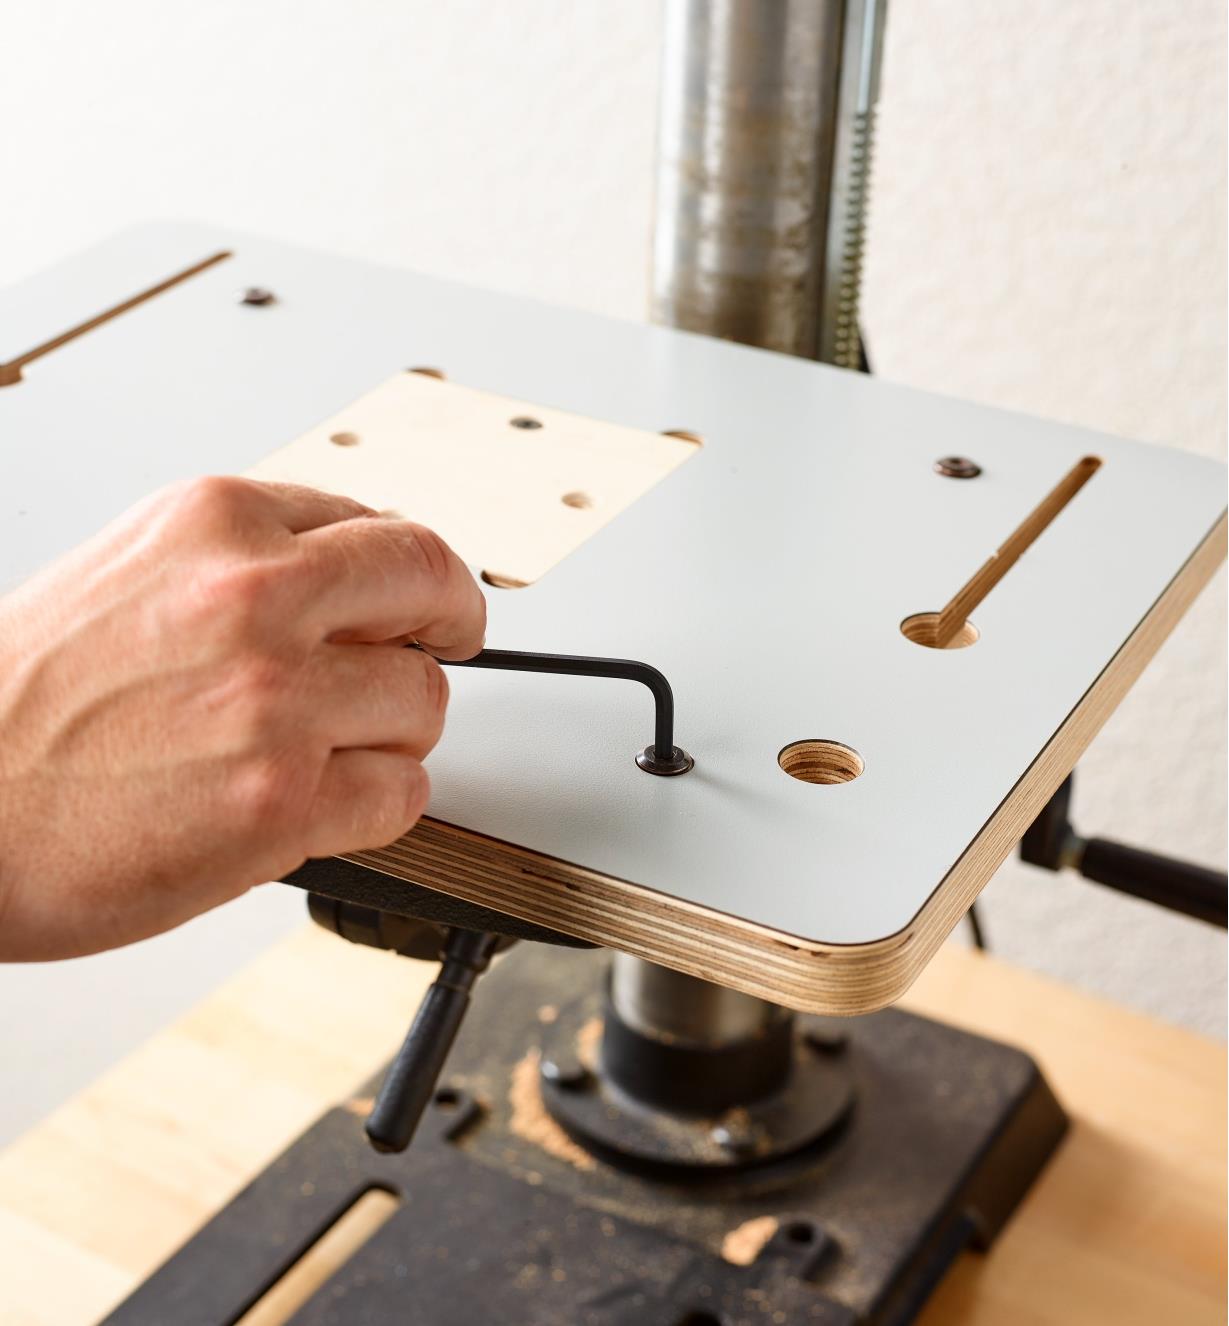 Securing the table top to the mounting plate